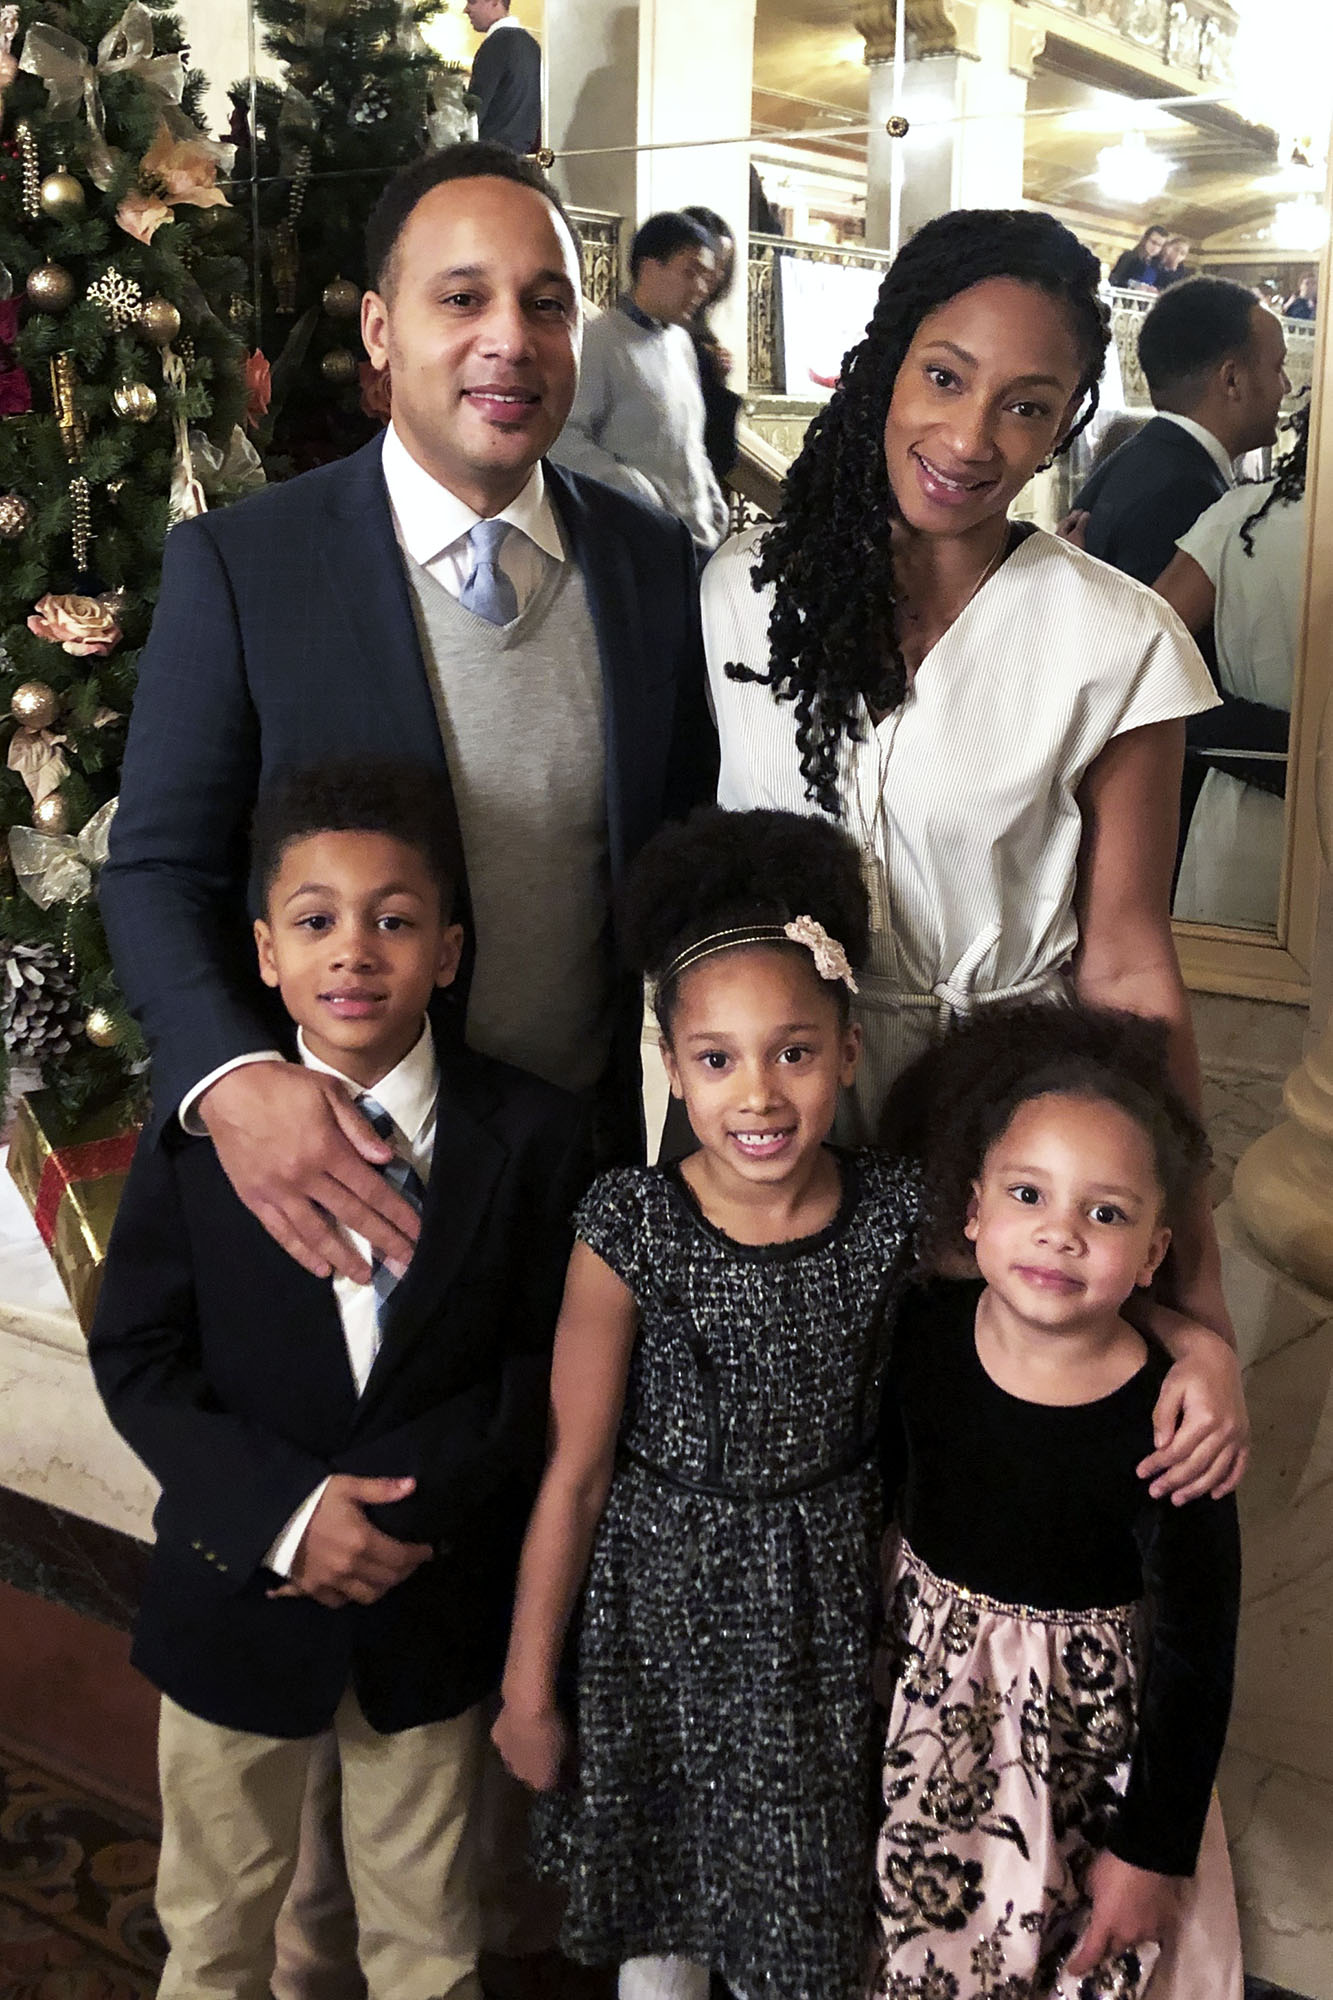 Pearman and his wife, Kristin, and their three children standing for a holiday photo